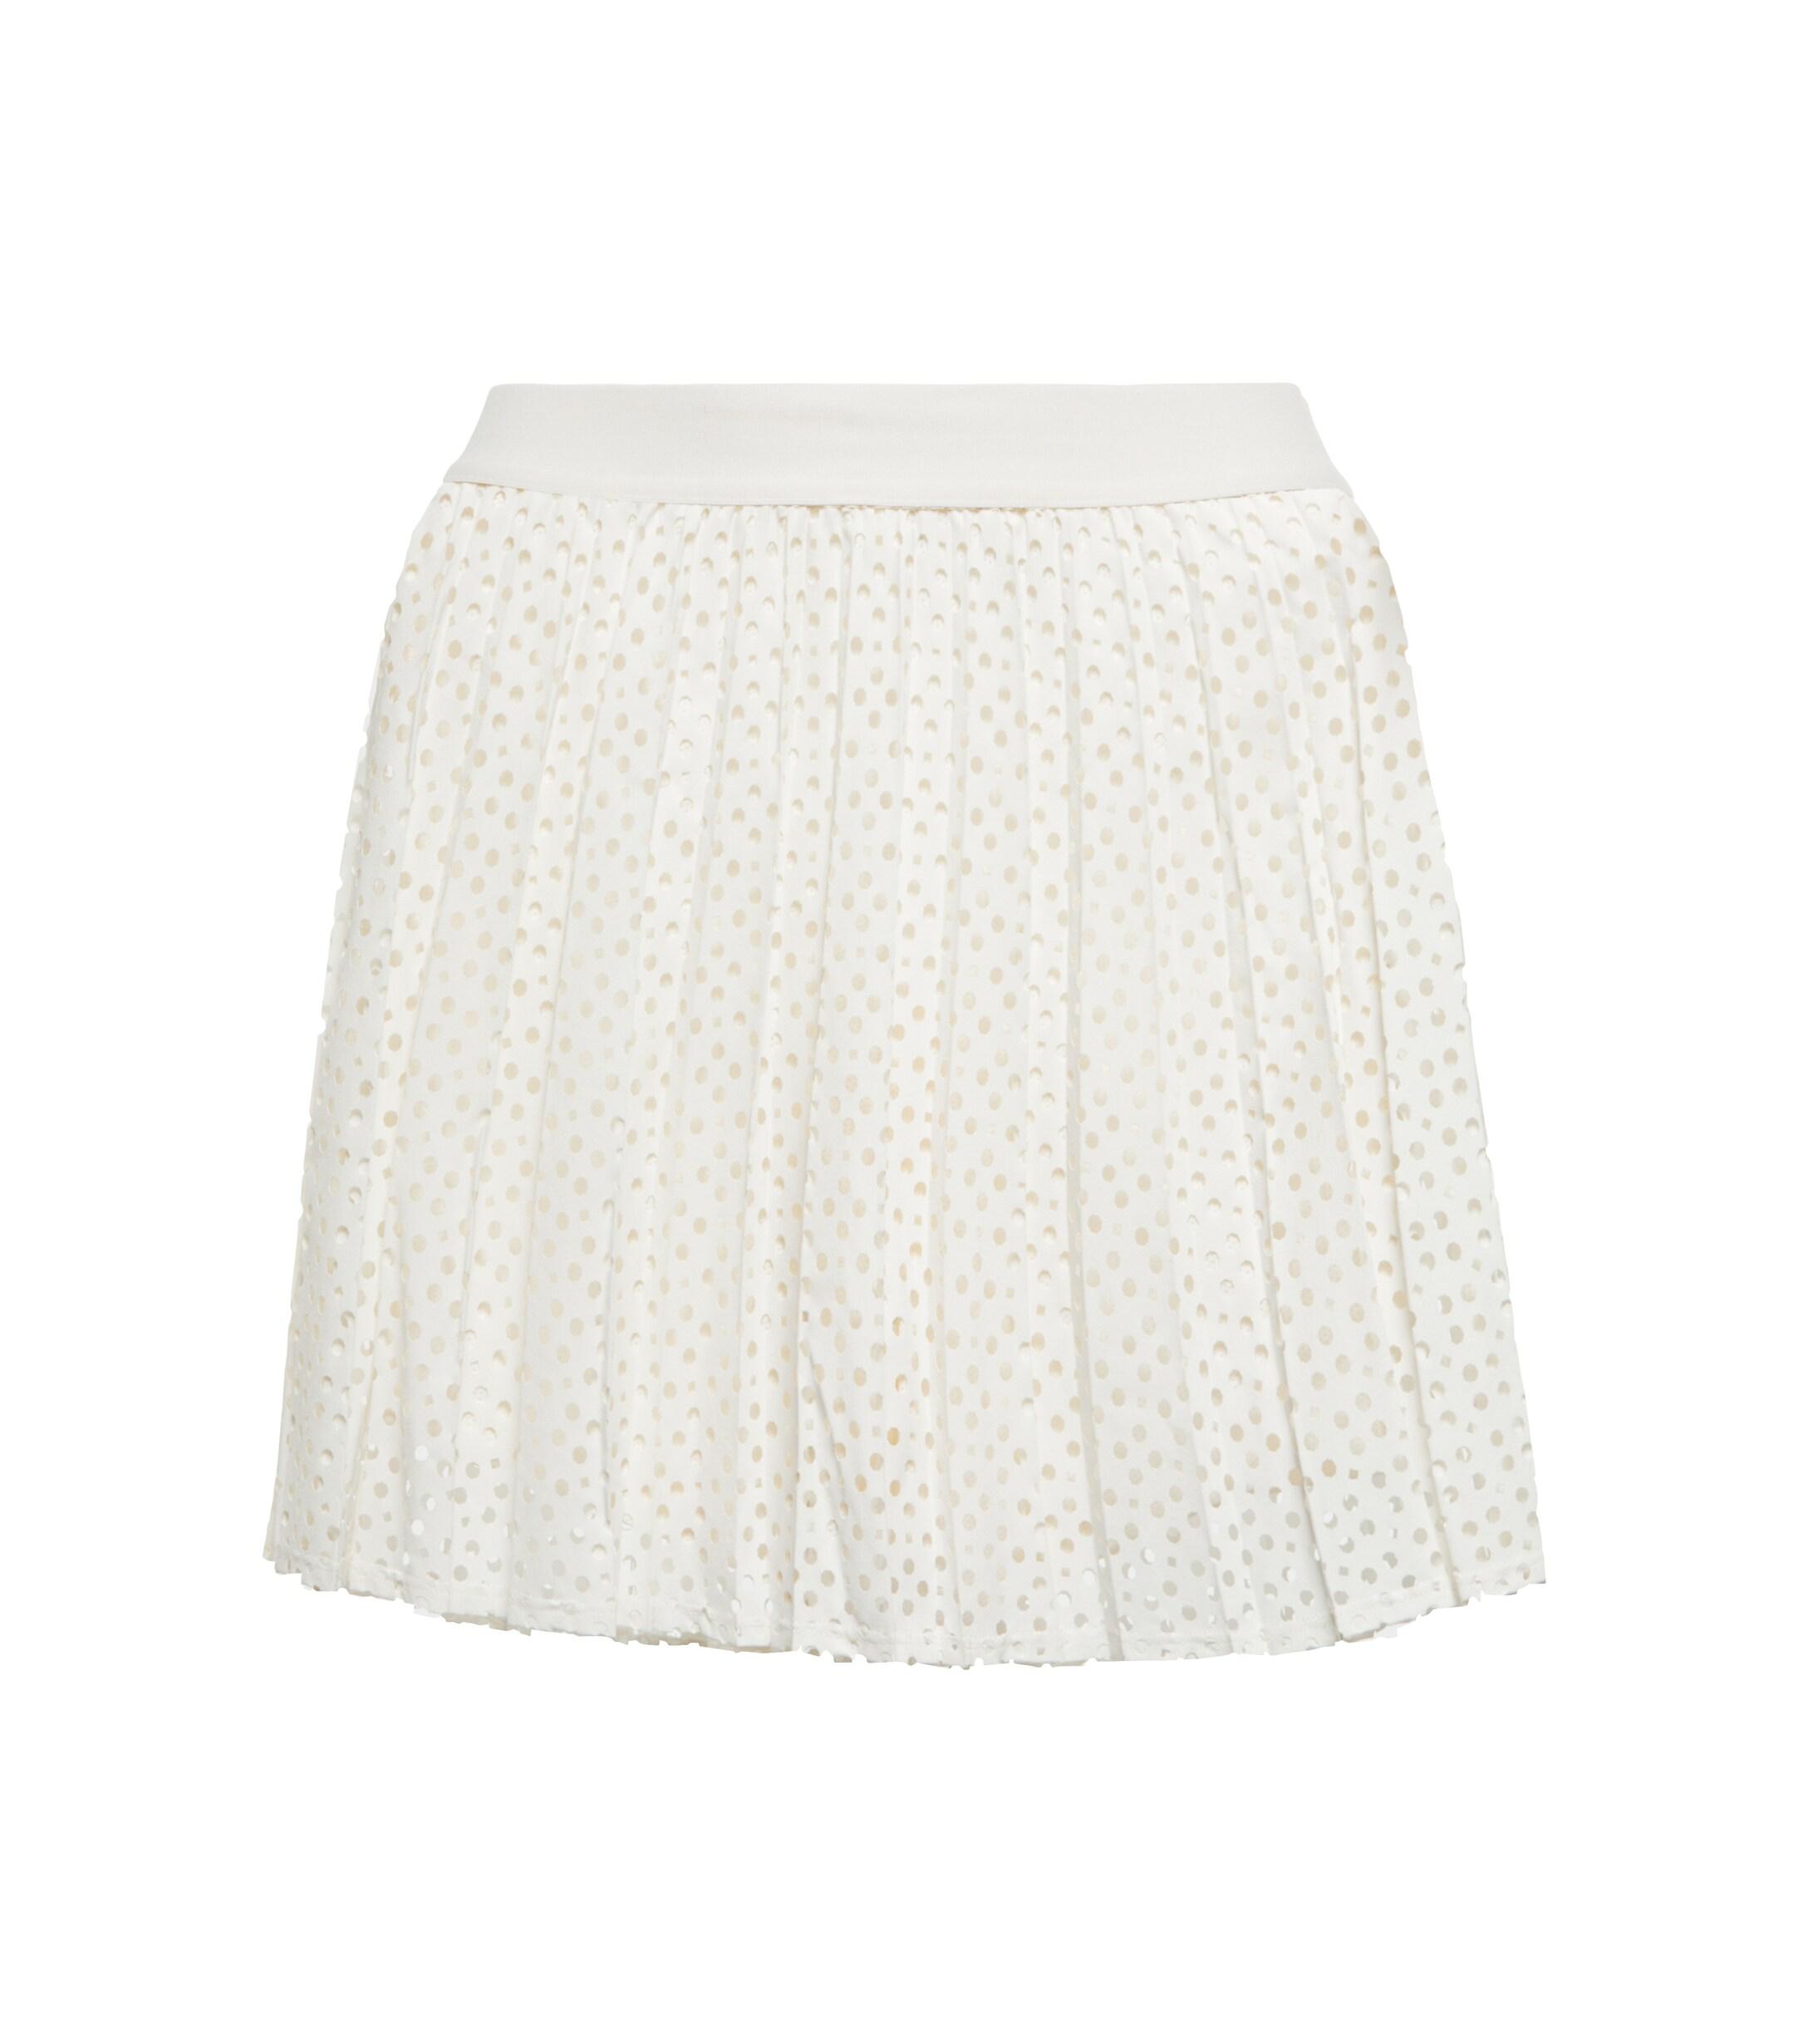 Tory Sport Laser-cut Pleated Miniskirt in White | Lyst Canada